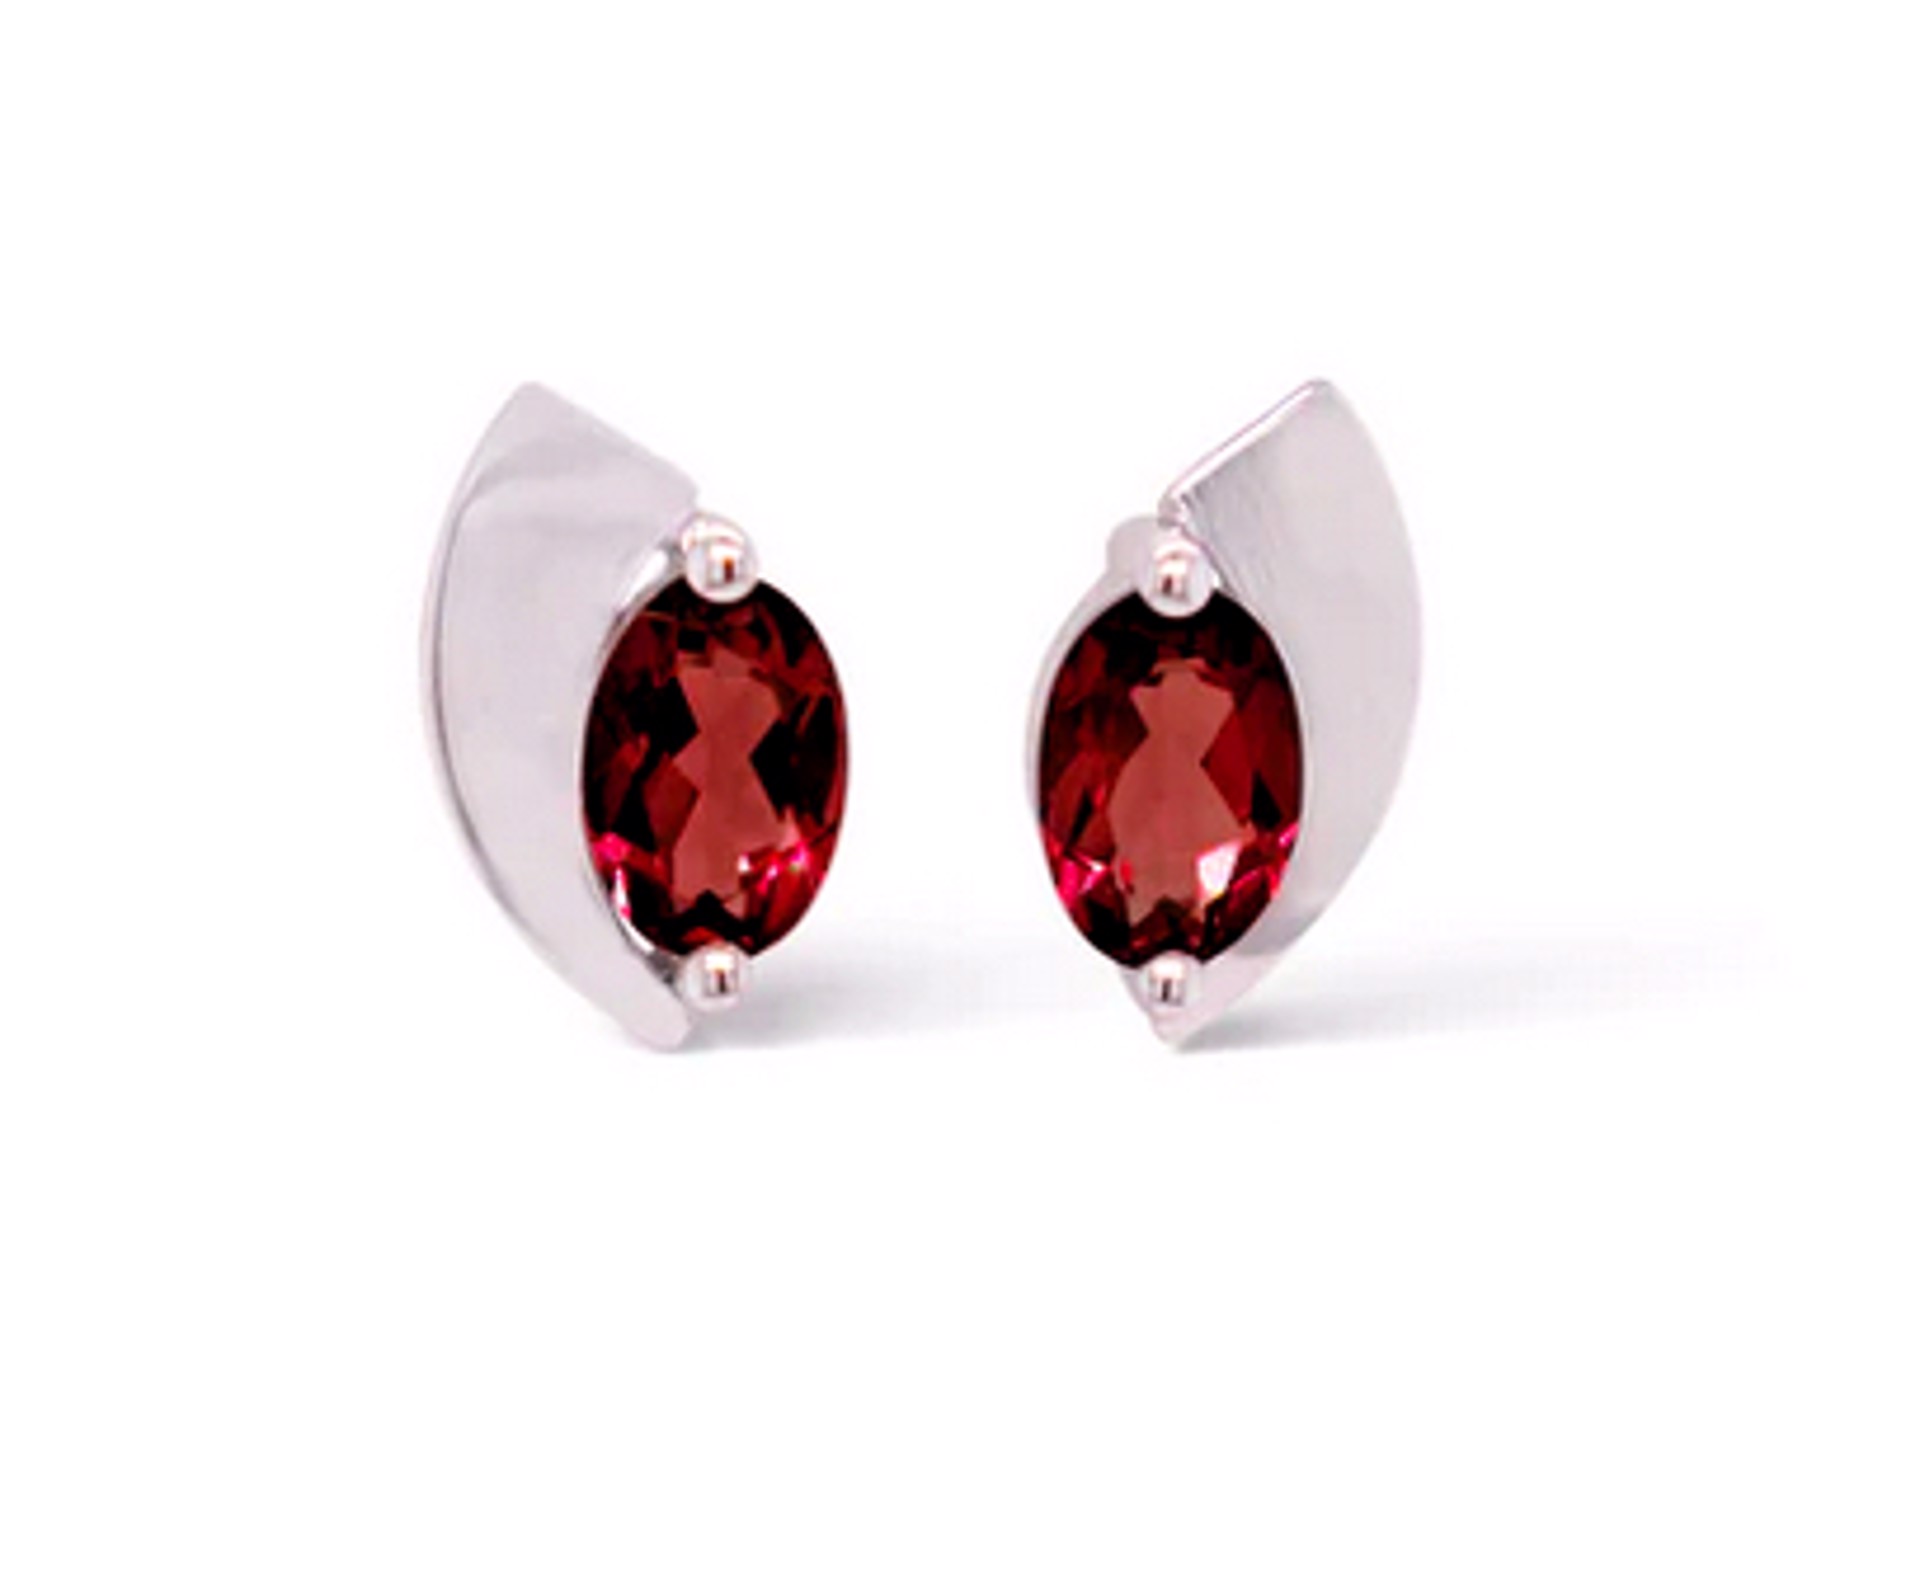 Earrings - Garnet With Polished Sterling Silver Droplet  E9298G by Joryel Vera